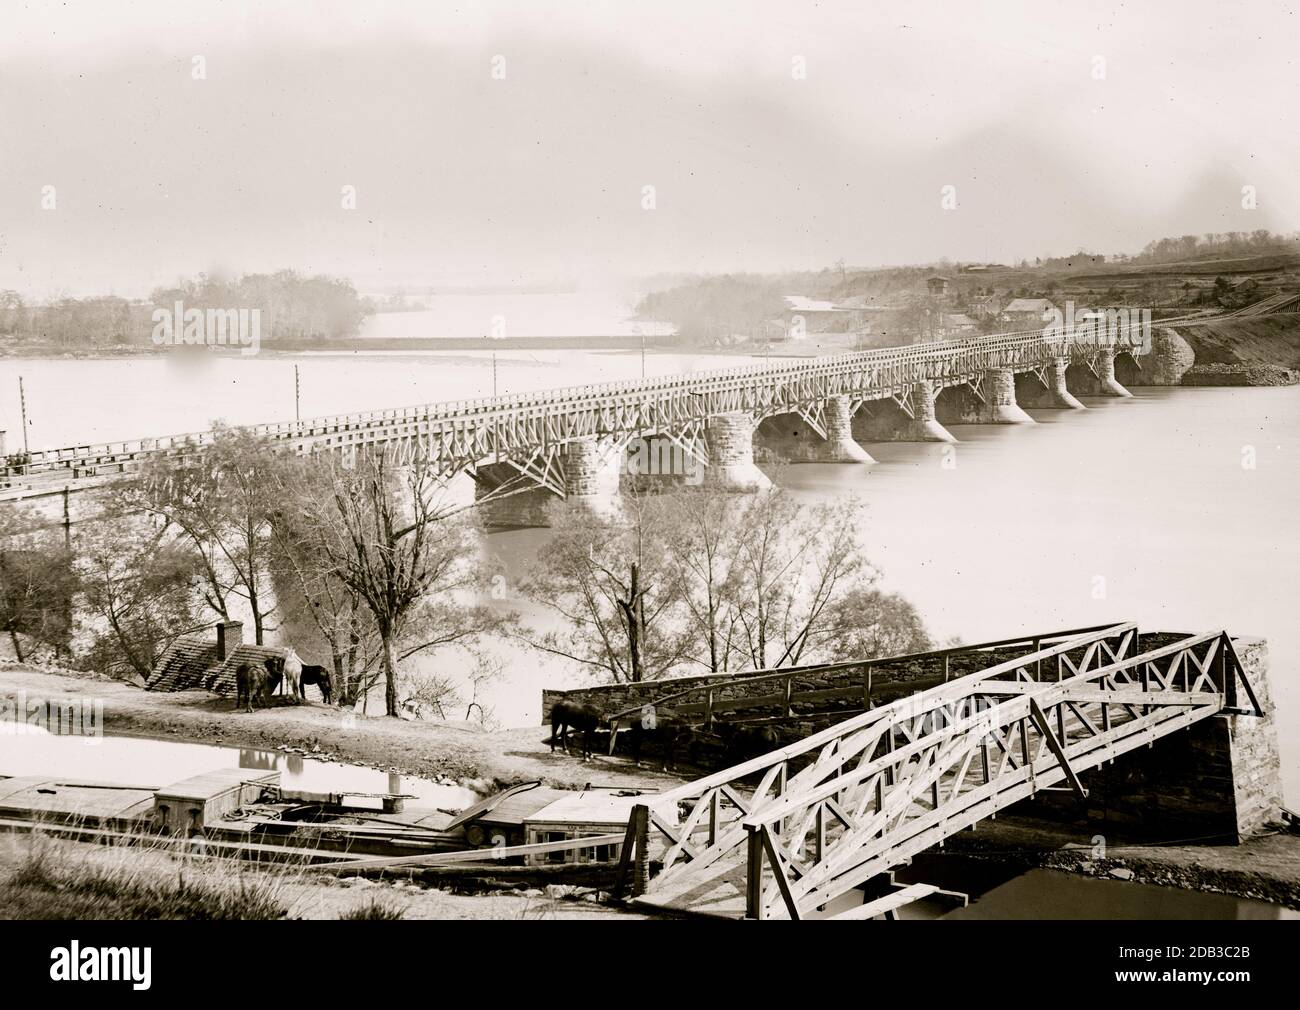 Washington, D.C. Closer view of Aqueduct Bridge, with Chesapeake and Ohio Canal in foreground. Stock Photo